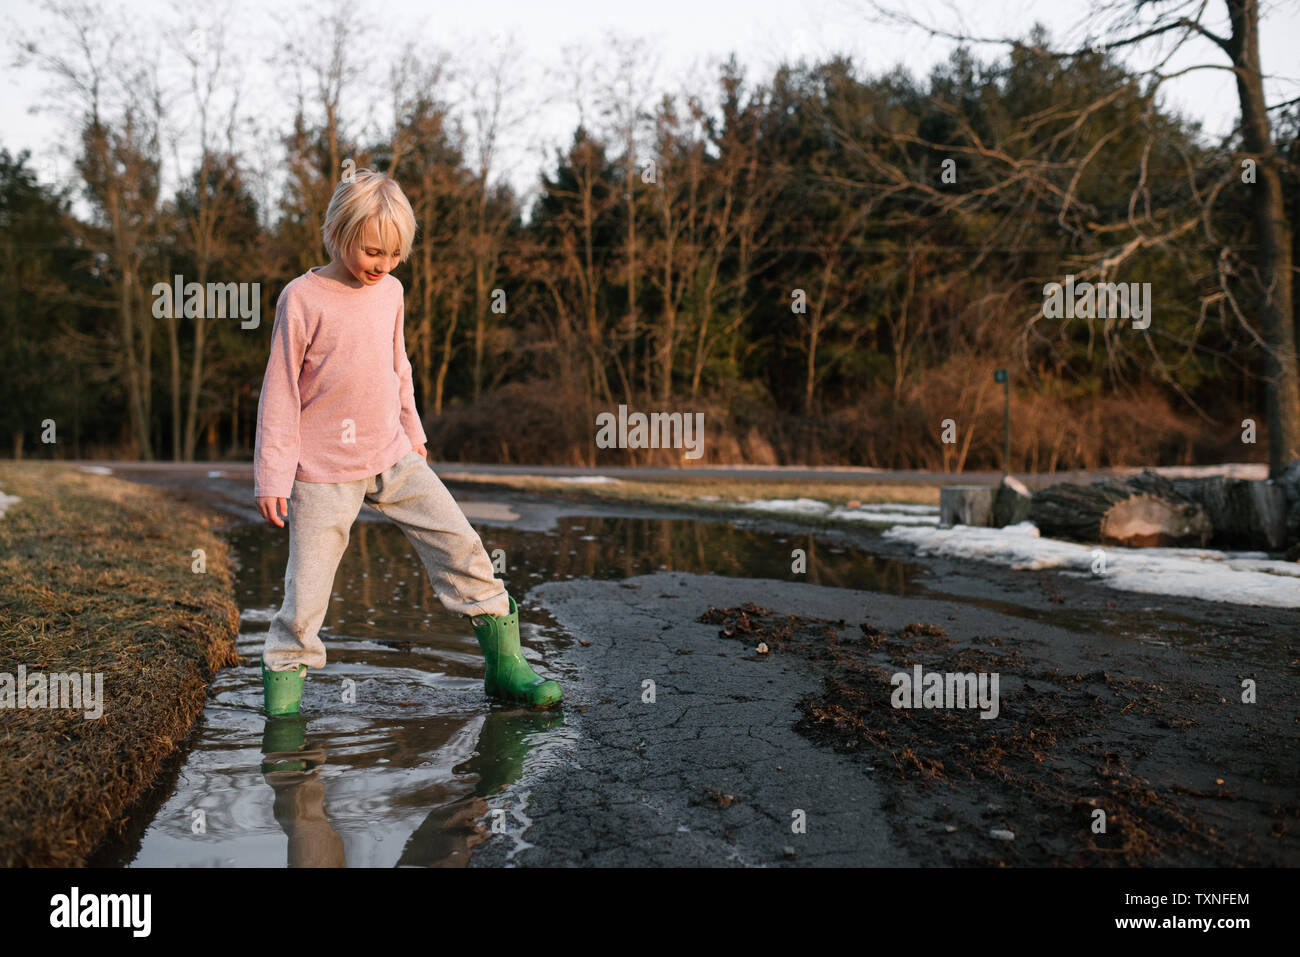 Boy stepping ankle deep in rural meltwater puddle Stock Photo